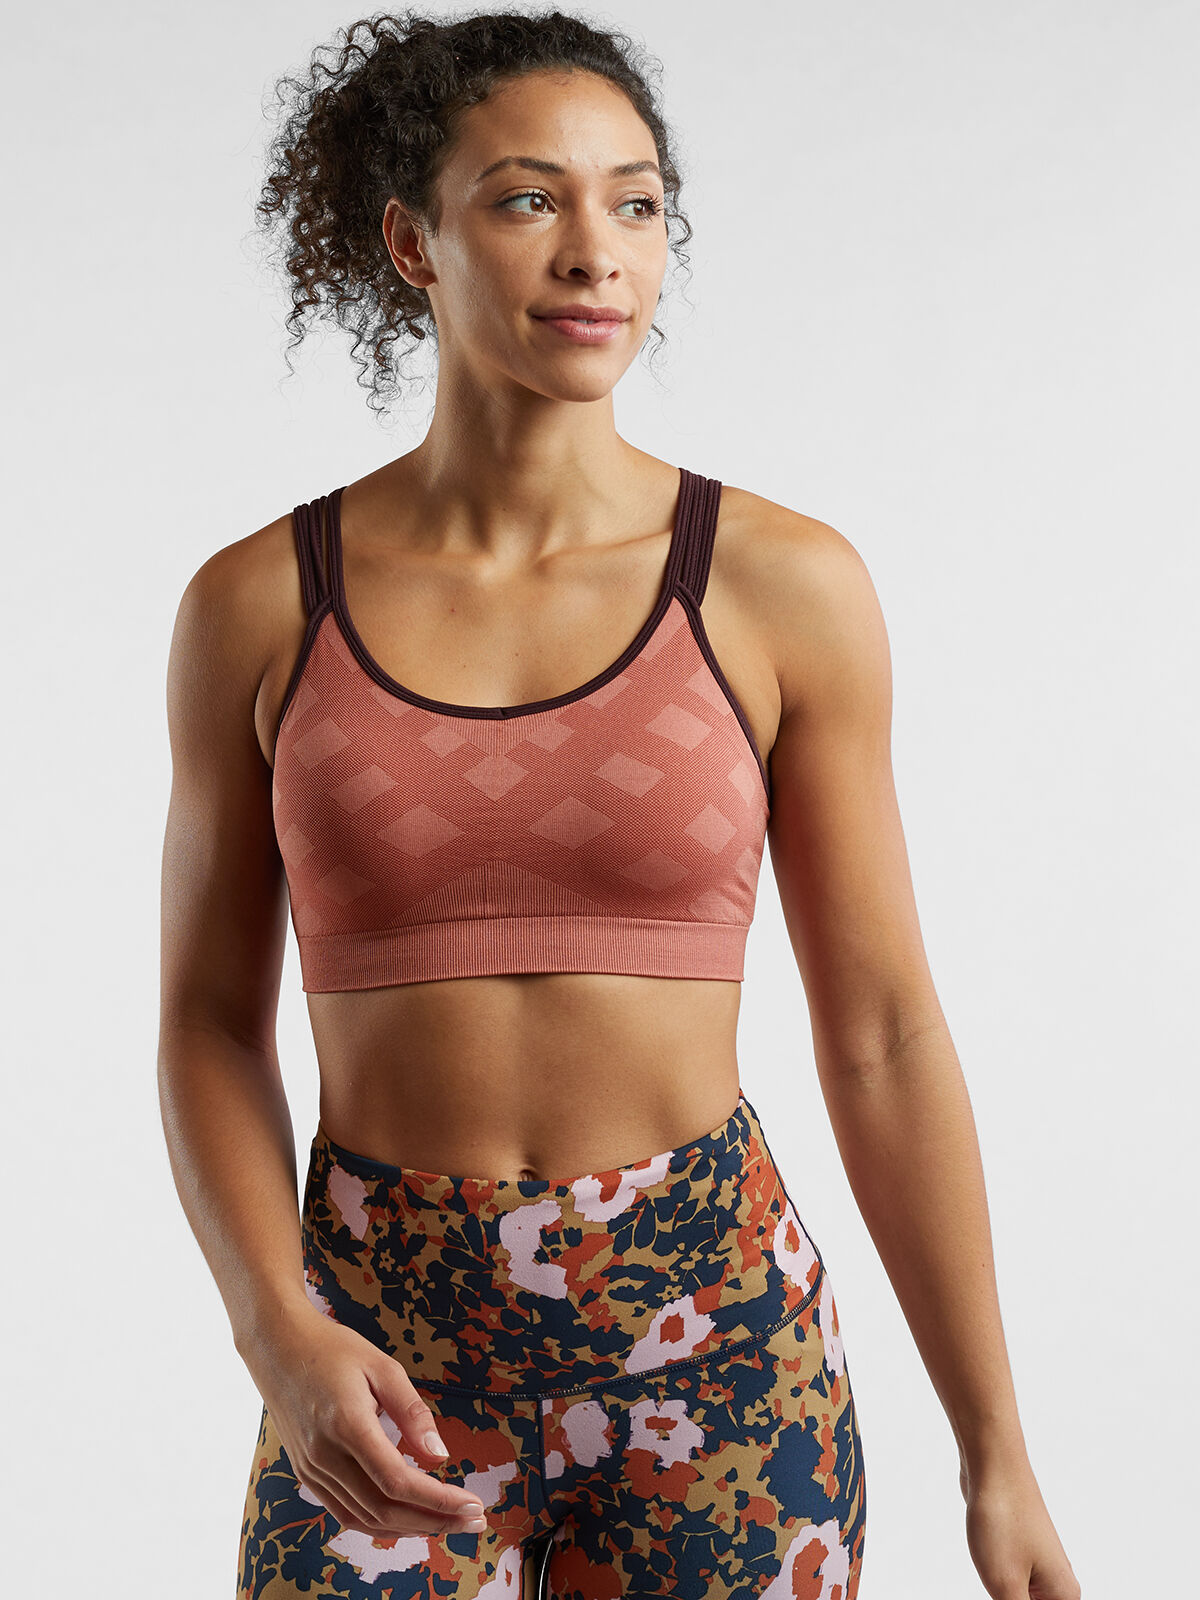 first sports bra ever made Hot Sale - OFF 53%